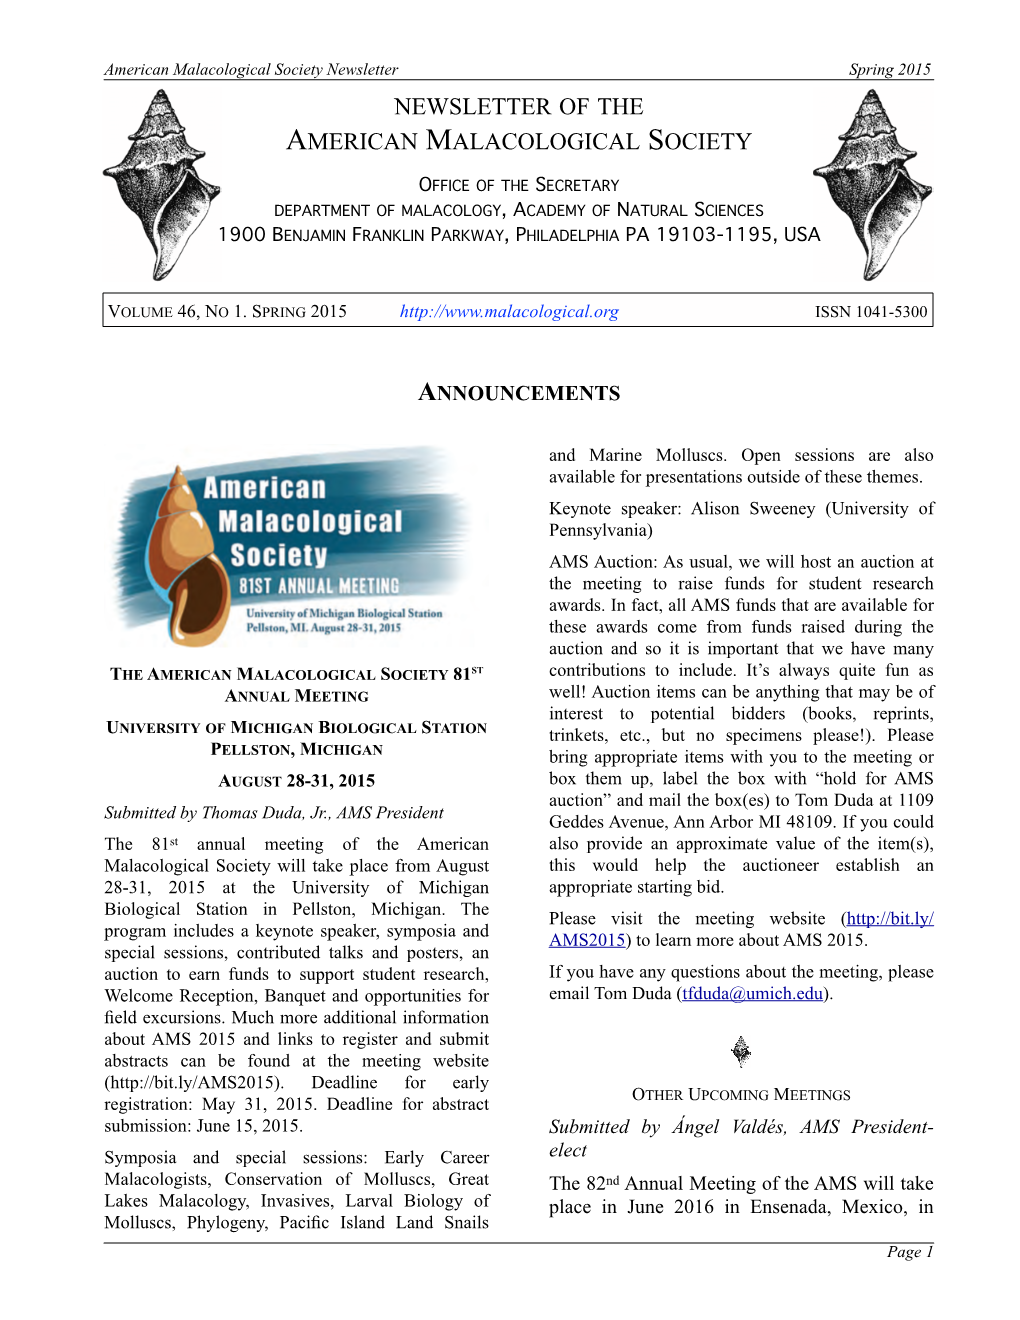 Spring 2015 NEWSLETTER of the AMERICAN MALACOLOGICAL SOCIETY